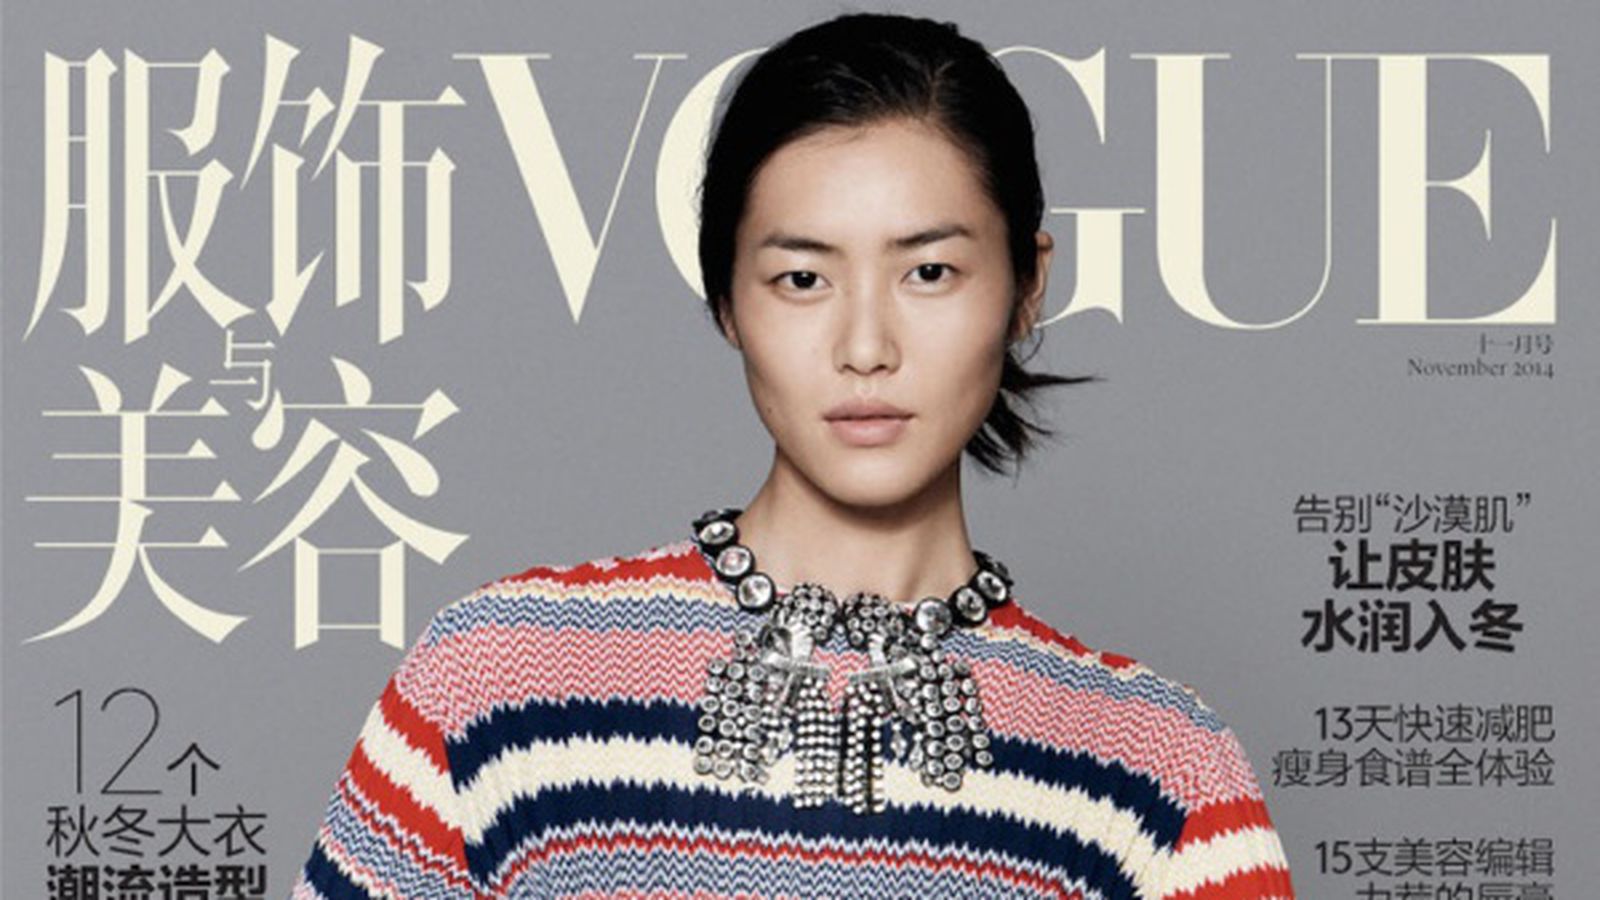 Apple Watch to be Featured in November Issue of Vogue China - MacRumors